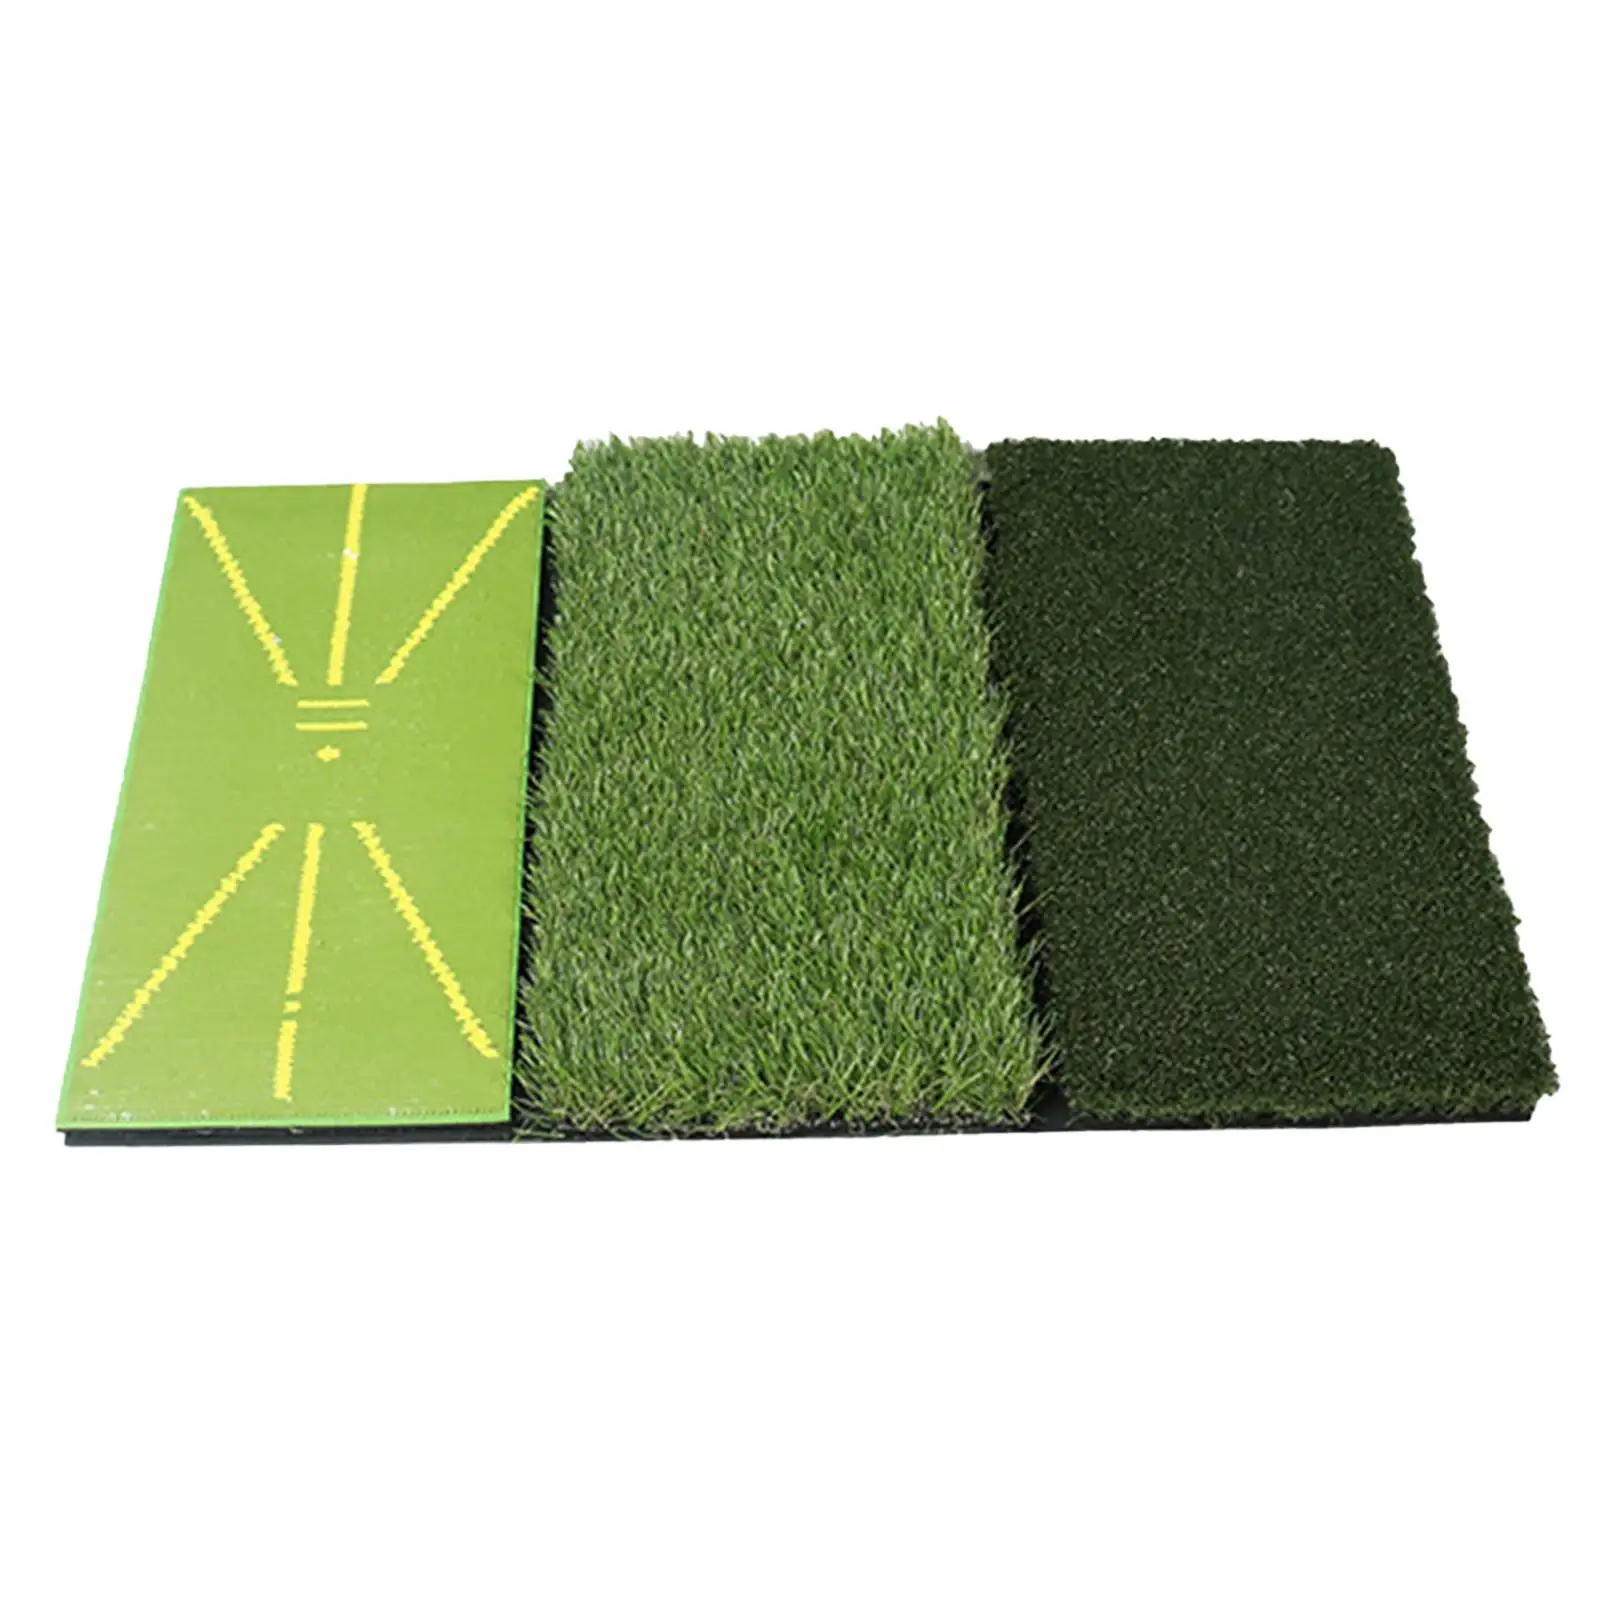 Golf Hitting Mat 3in1 Correct Hitting Posture for Game Backyards Home Office